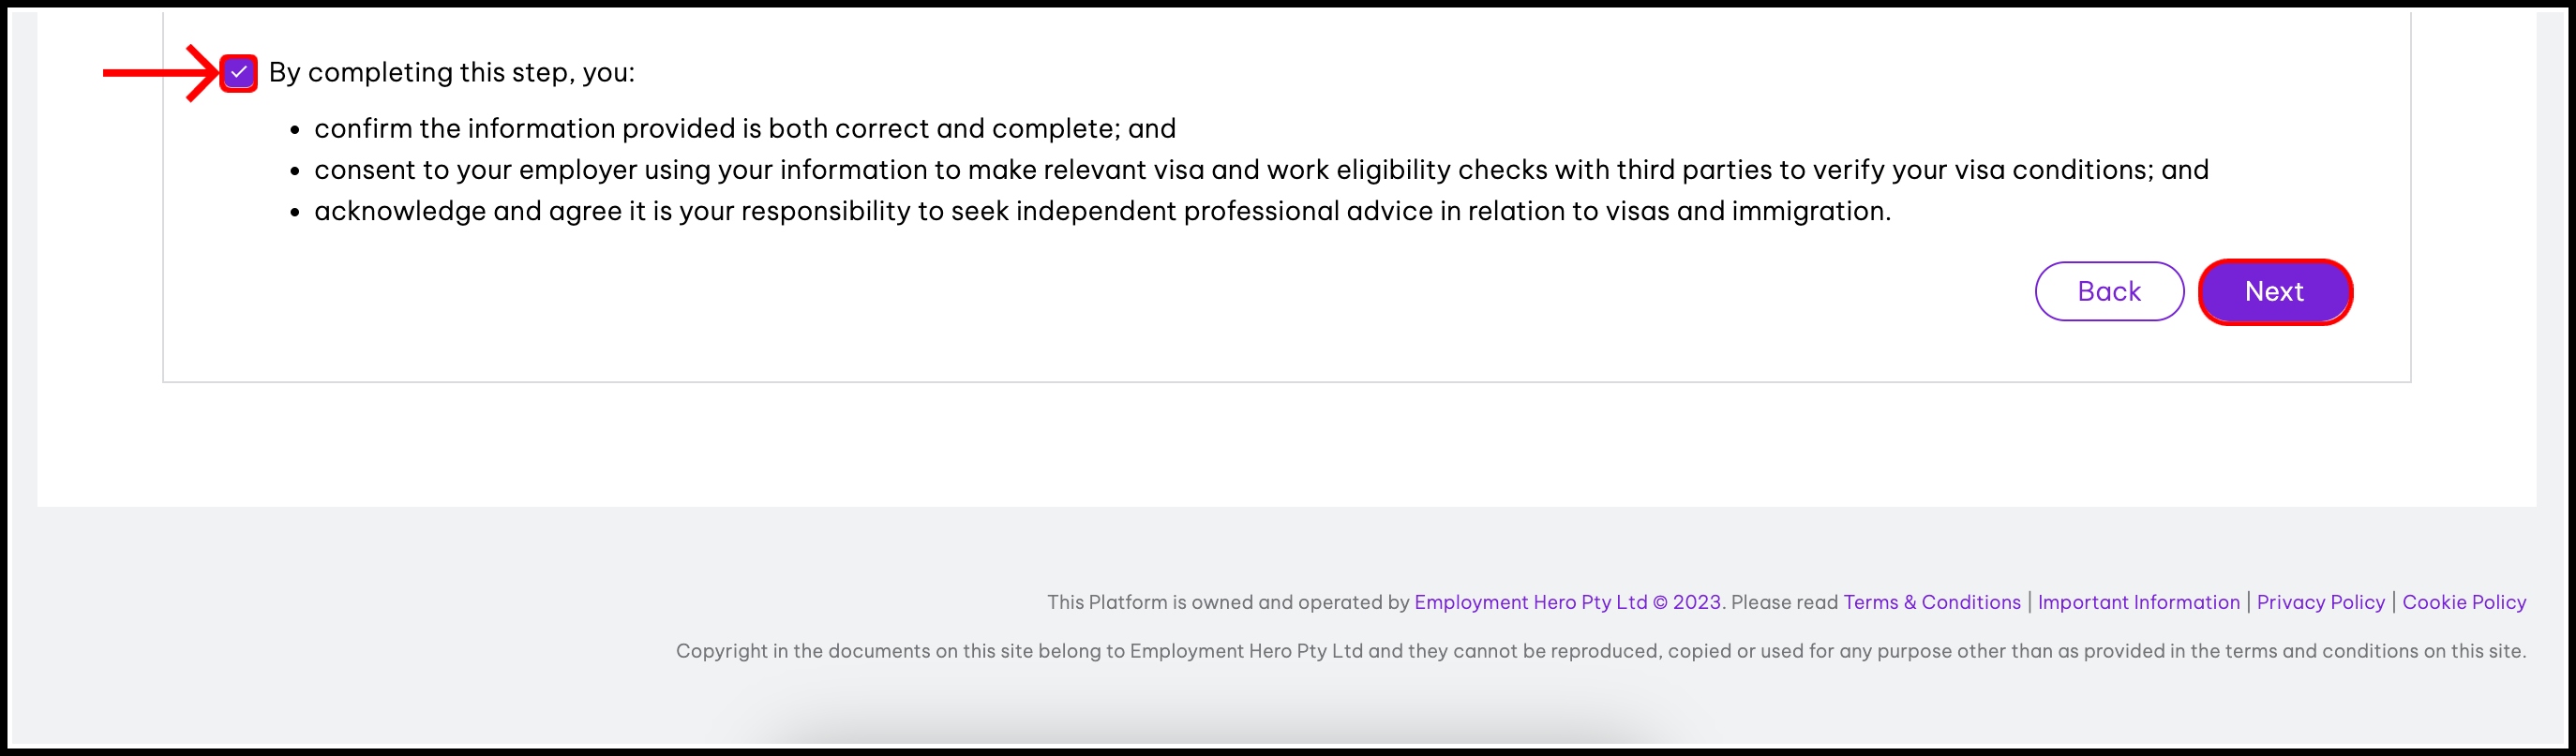 screenshot of the acknowledgement section of the work eligibility page, highlighting the next button